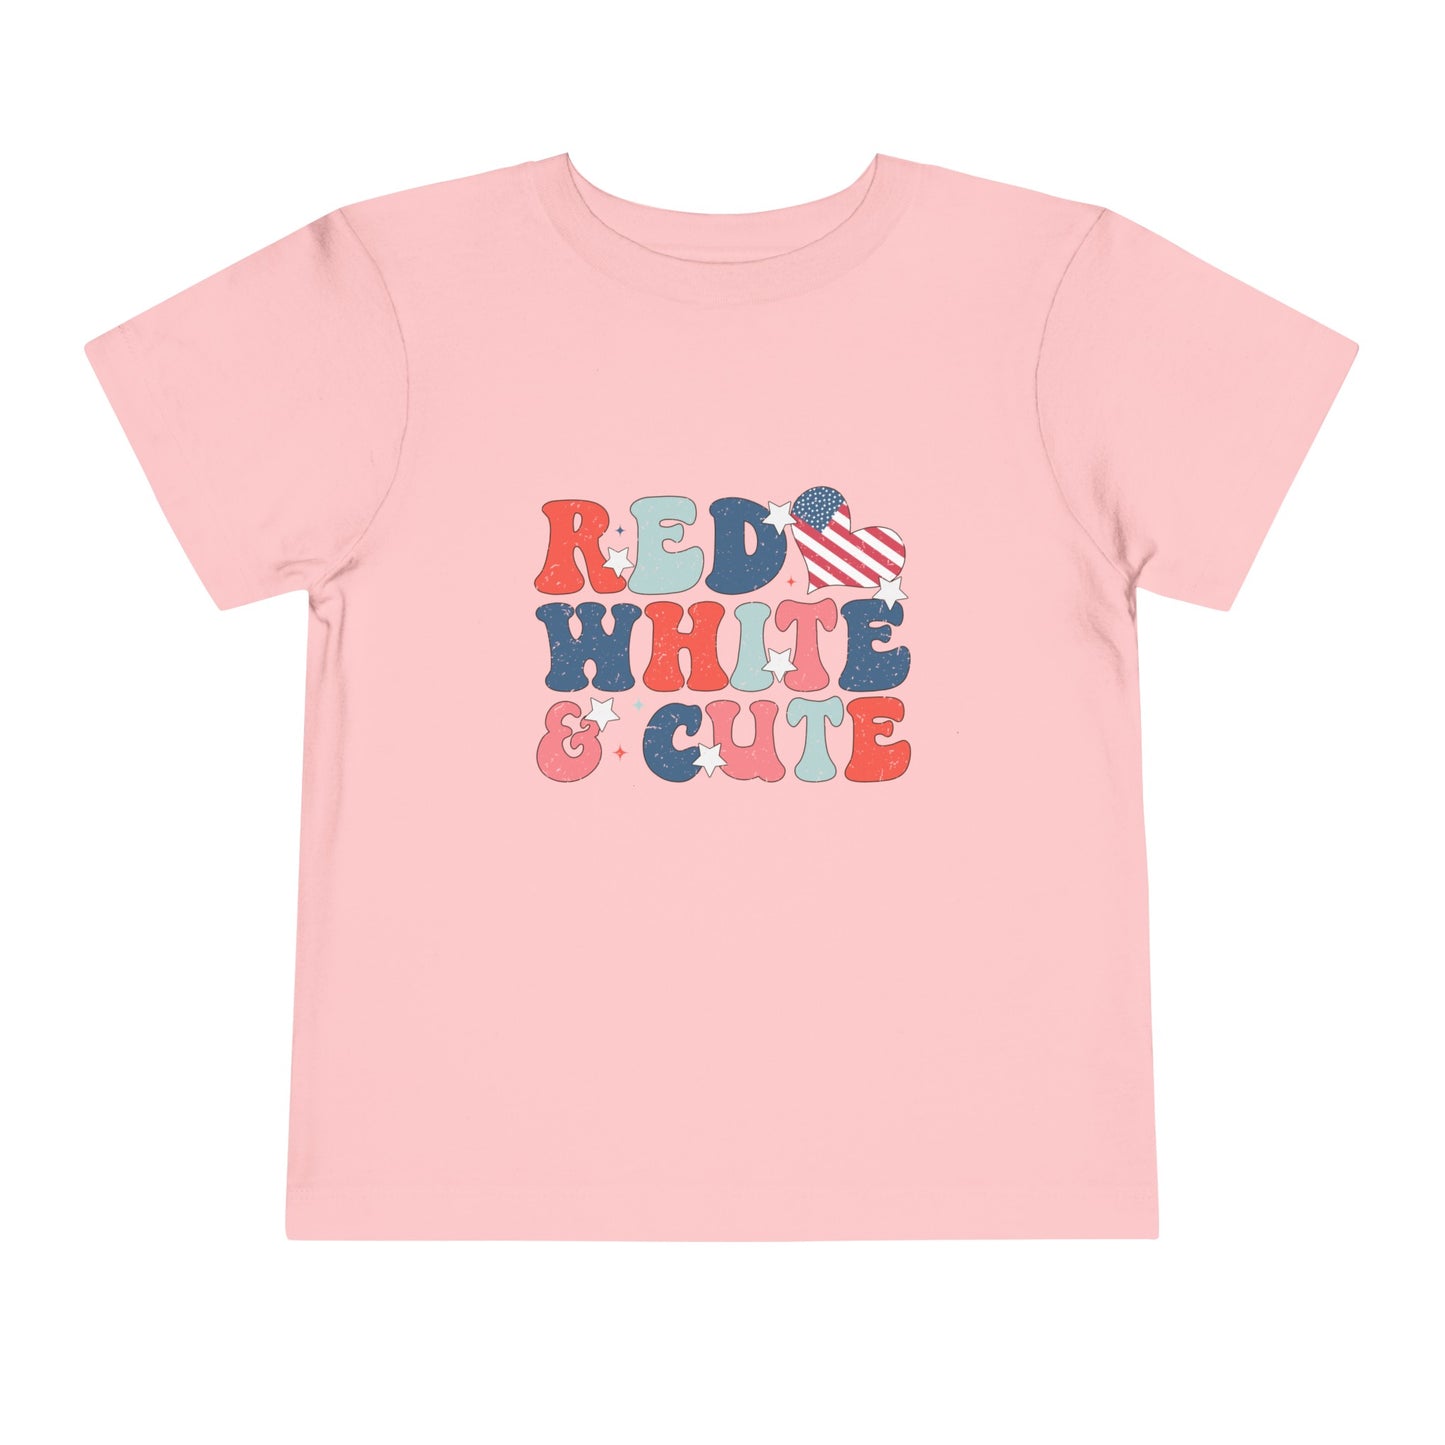 Red White & Cute Patriotic USA America  Toddler Short Sleeve Tee